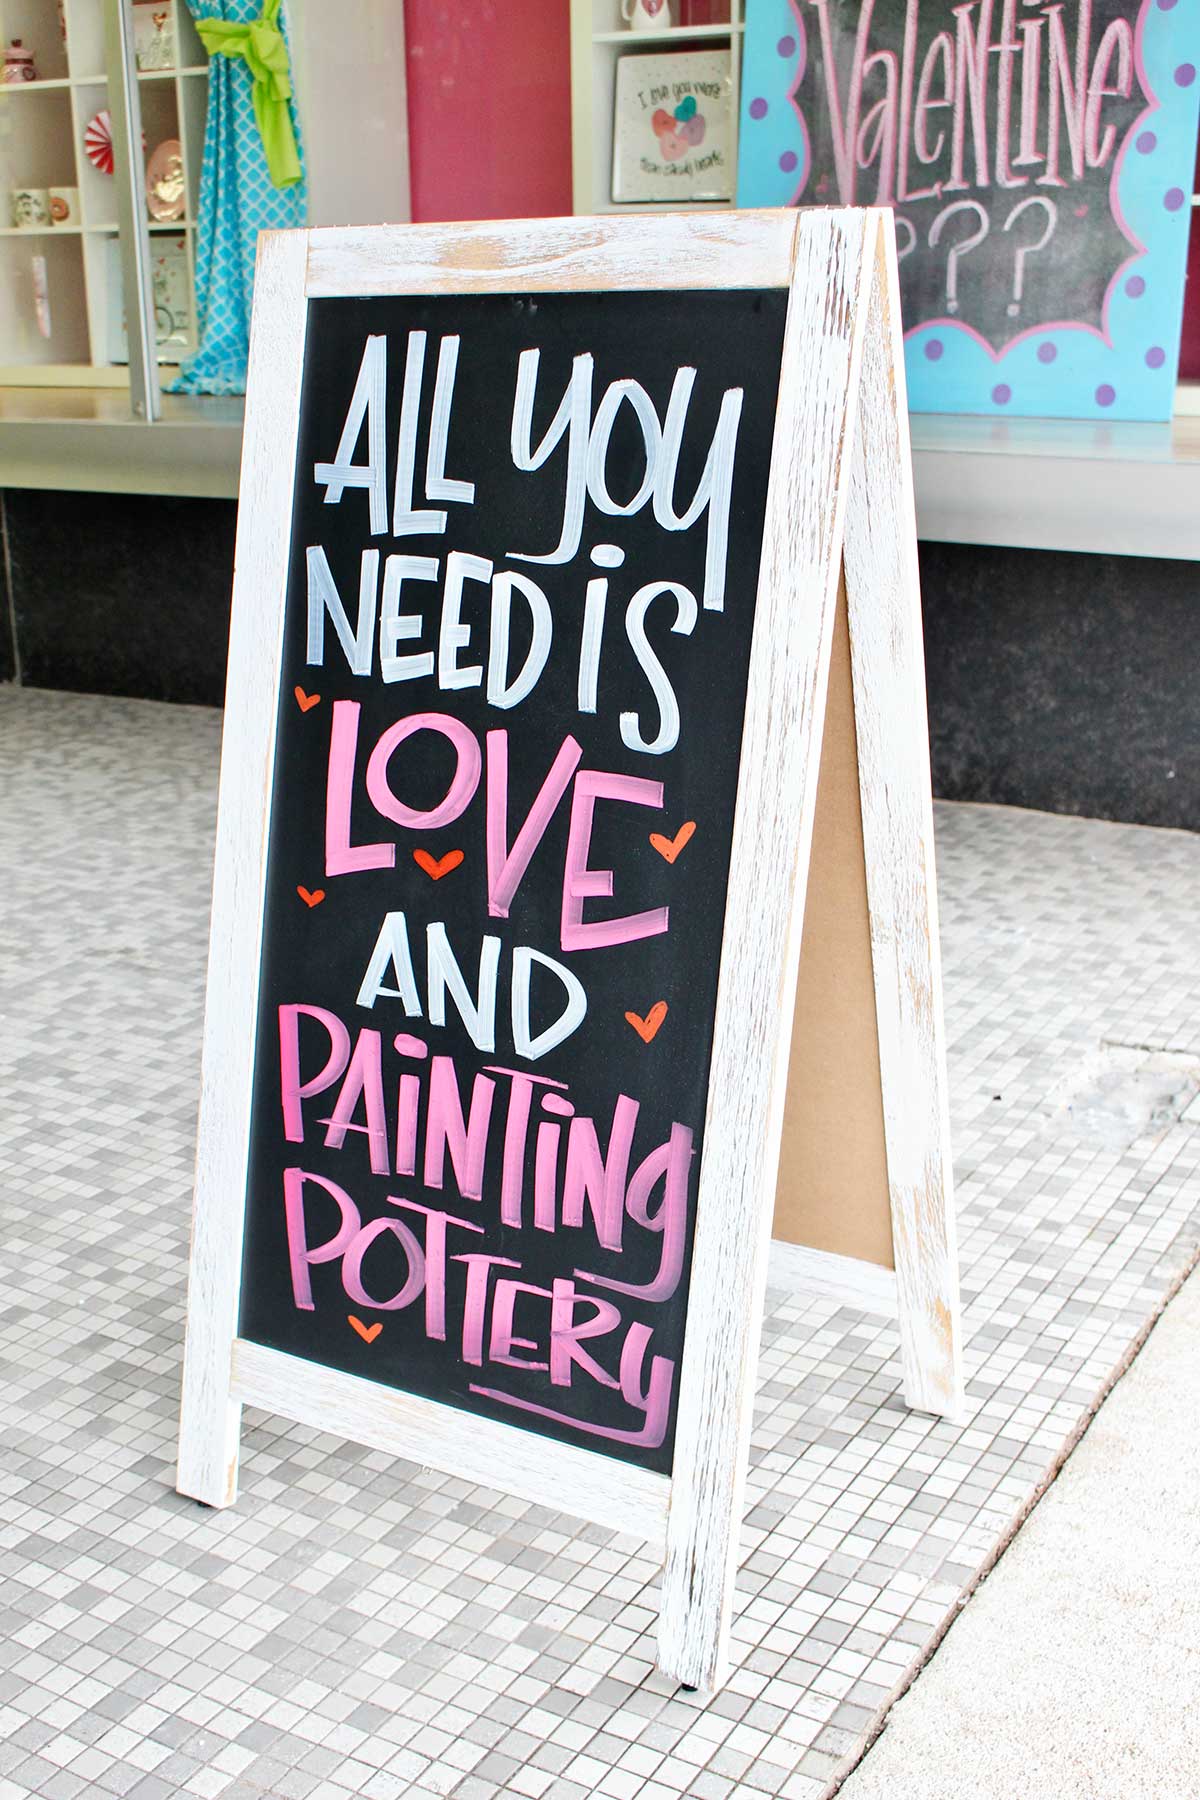 Sign outside of ceramic painting studio that says "All you need is love and painting pottery"